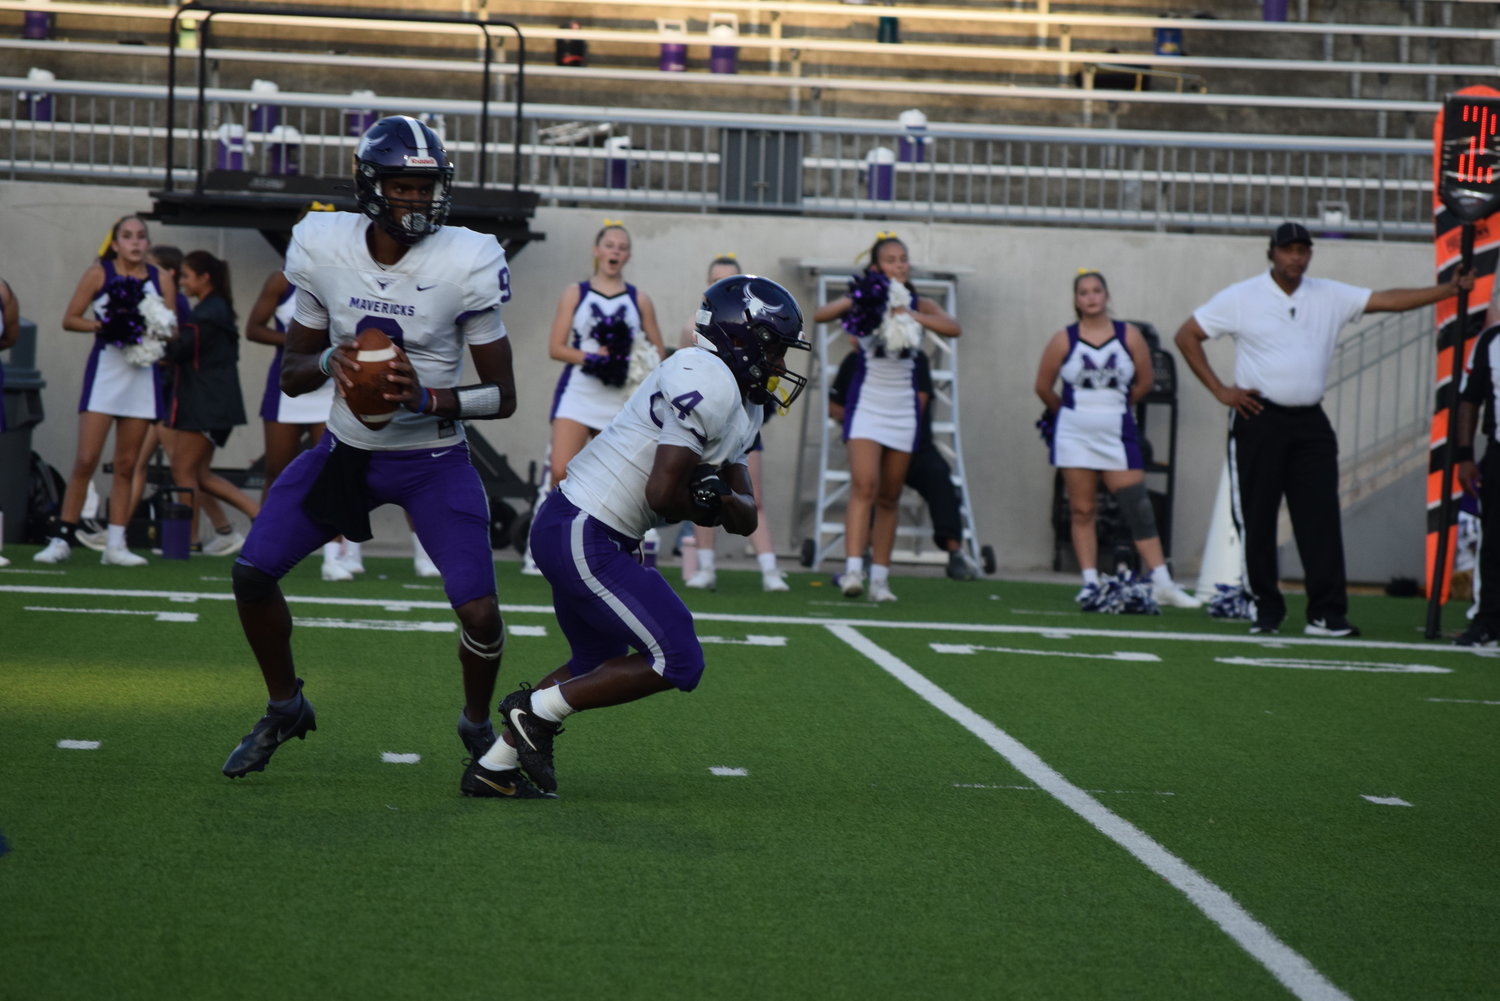 Josh Johnson looks downfield during a game against Paetow on Sept. 3 at Legacy Stadium.